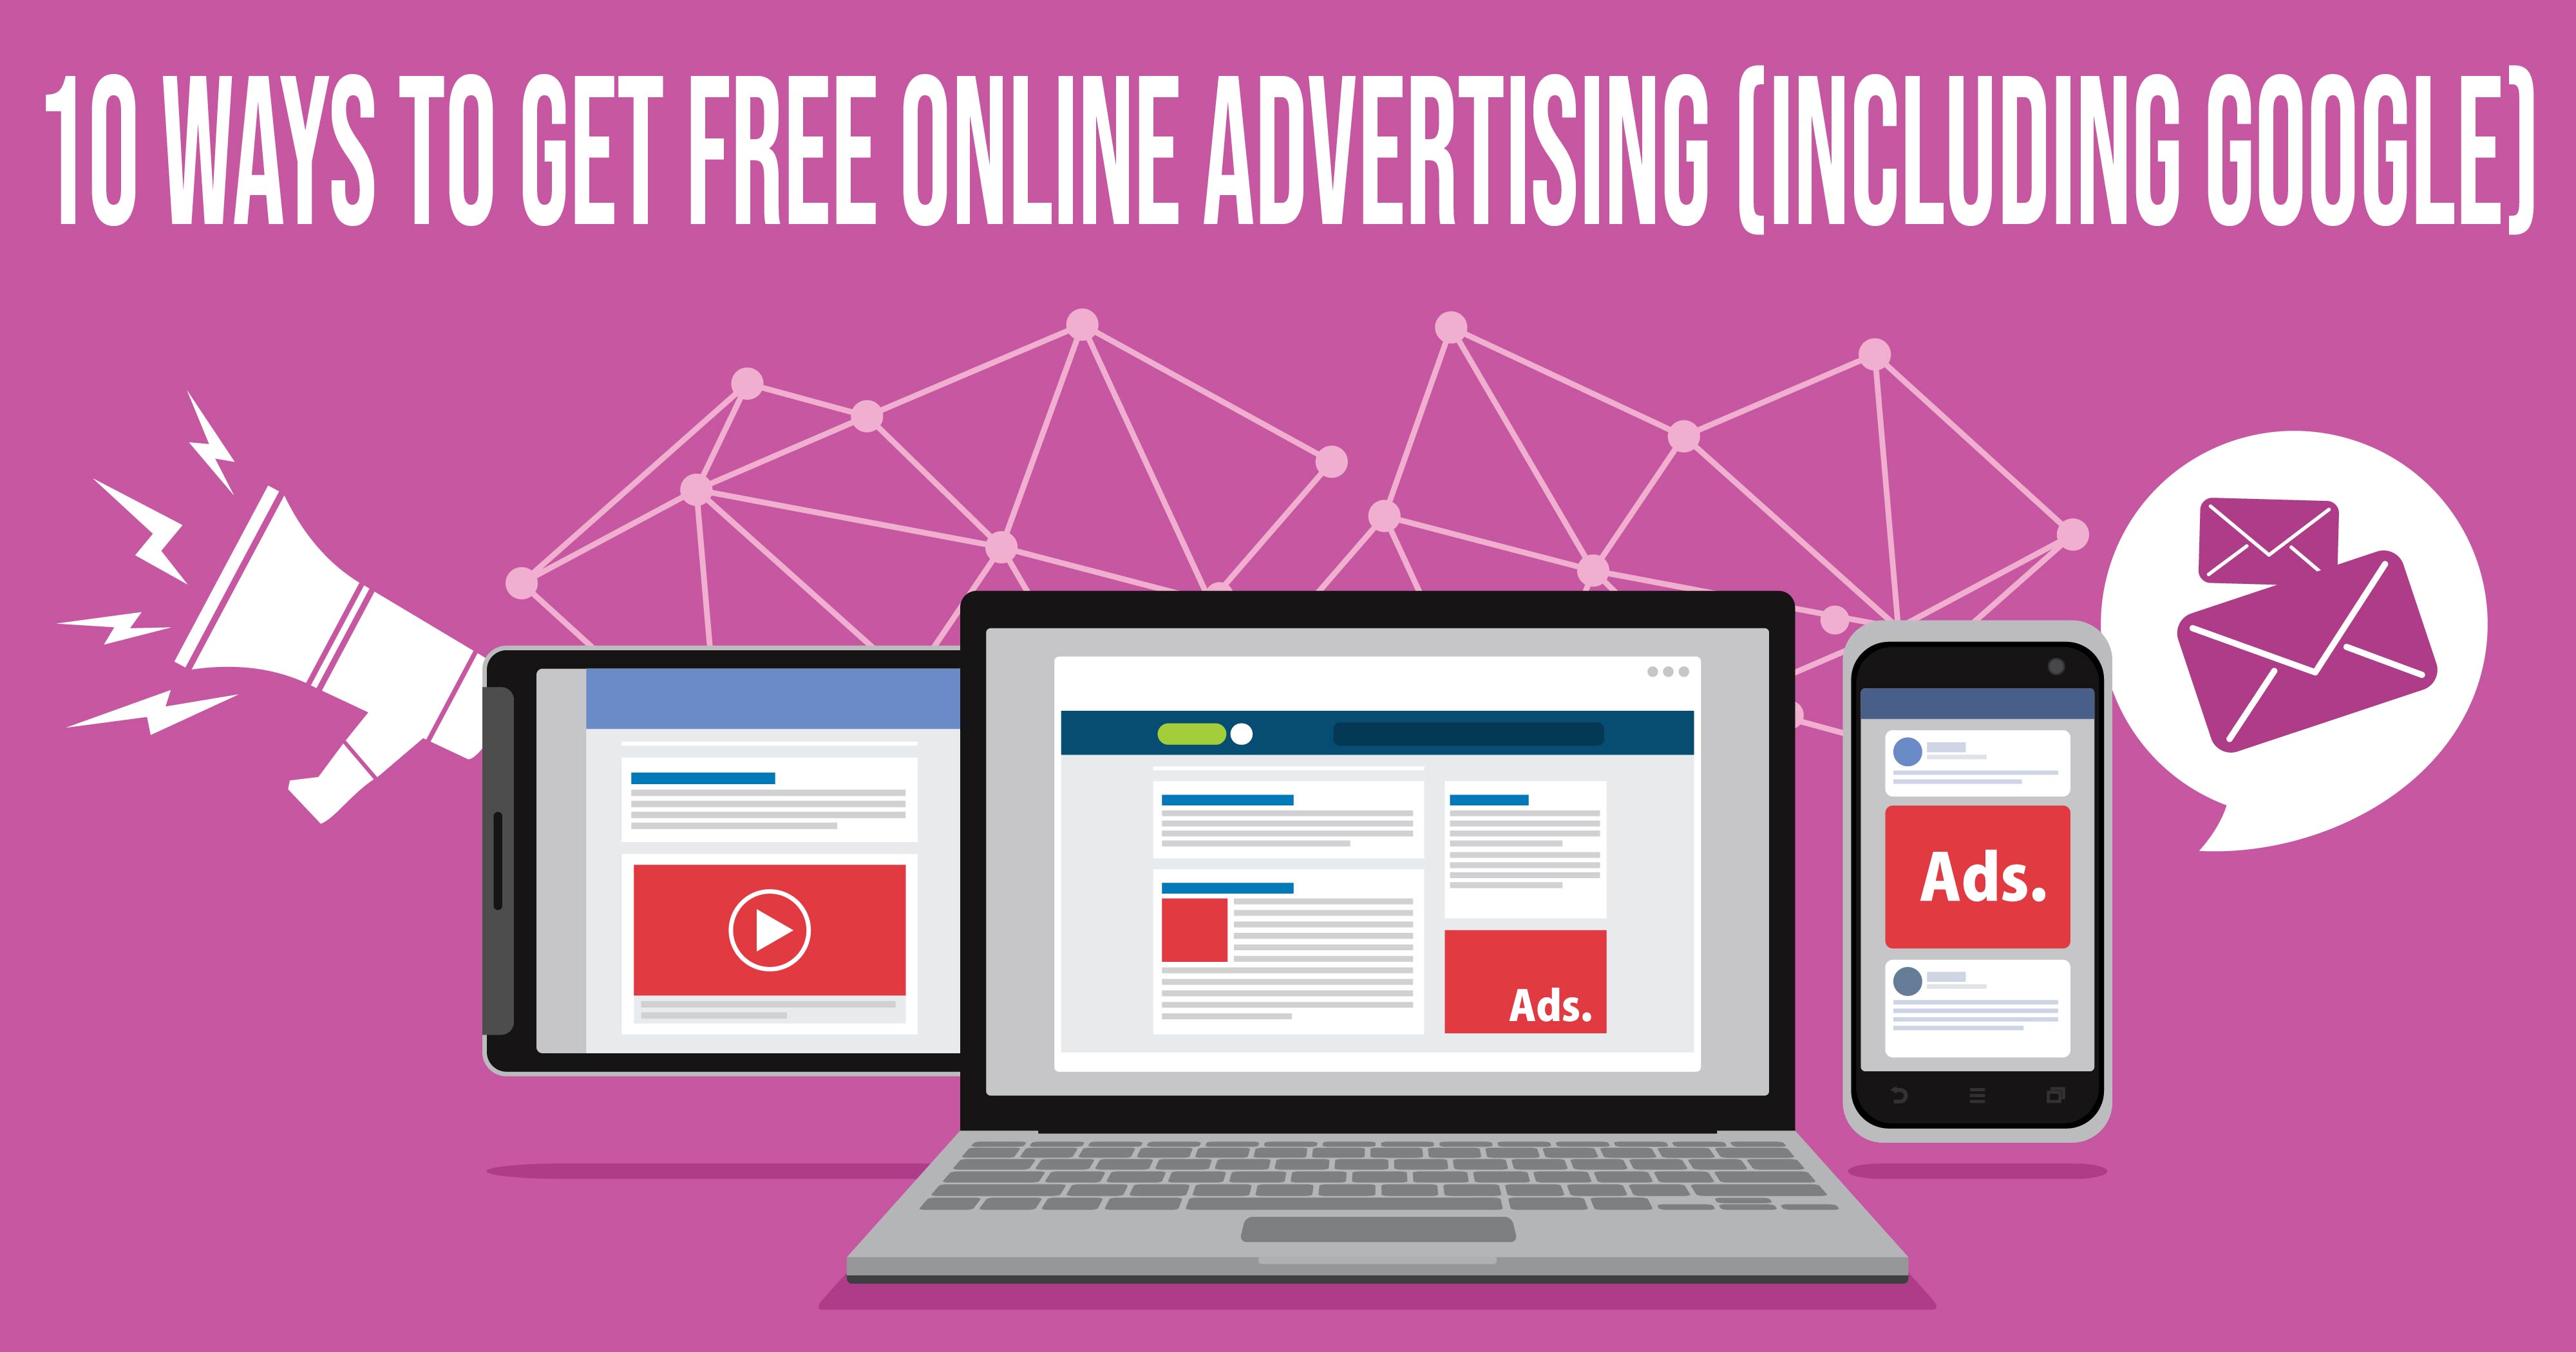 10 Ways To Get Free Online Advertising (including Google) 01